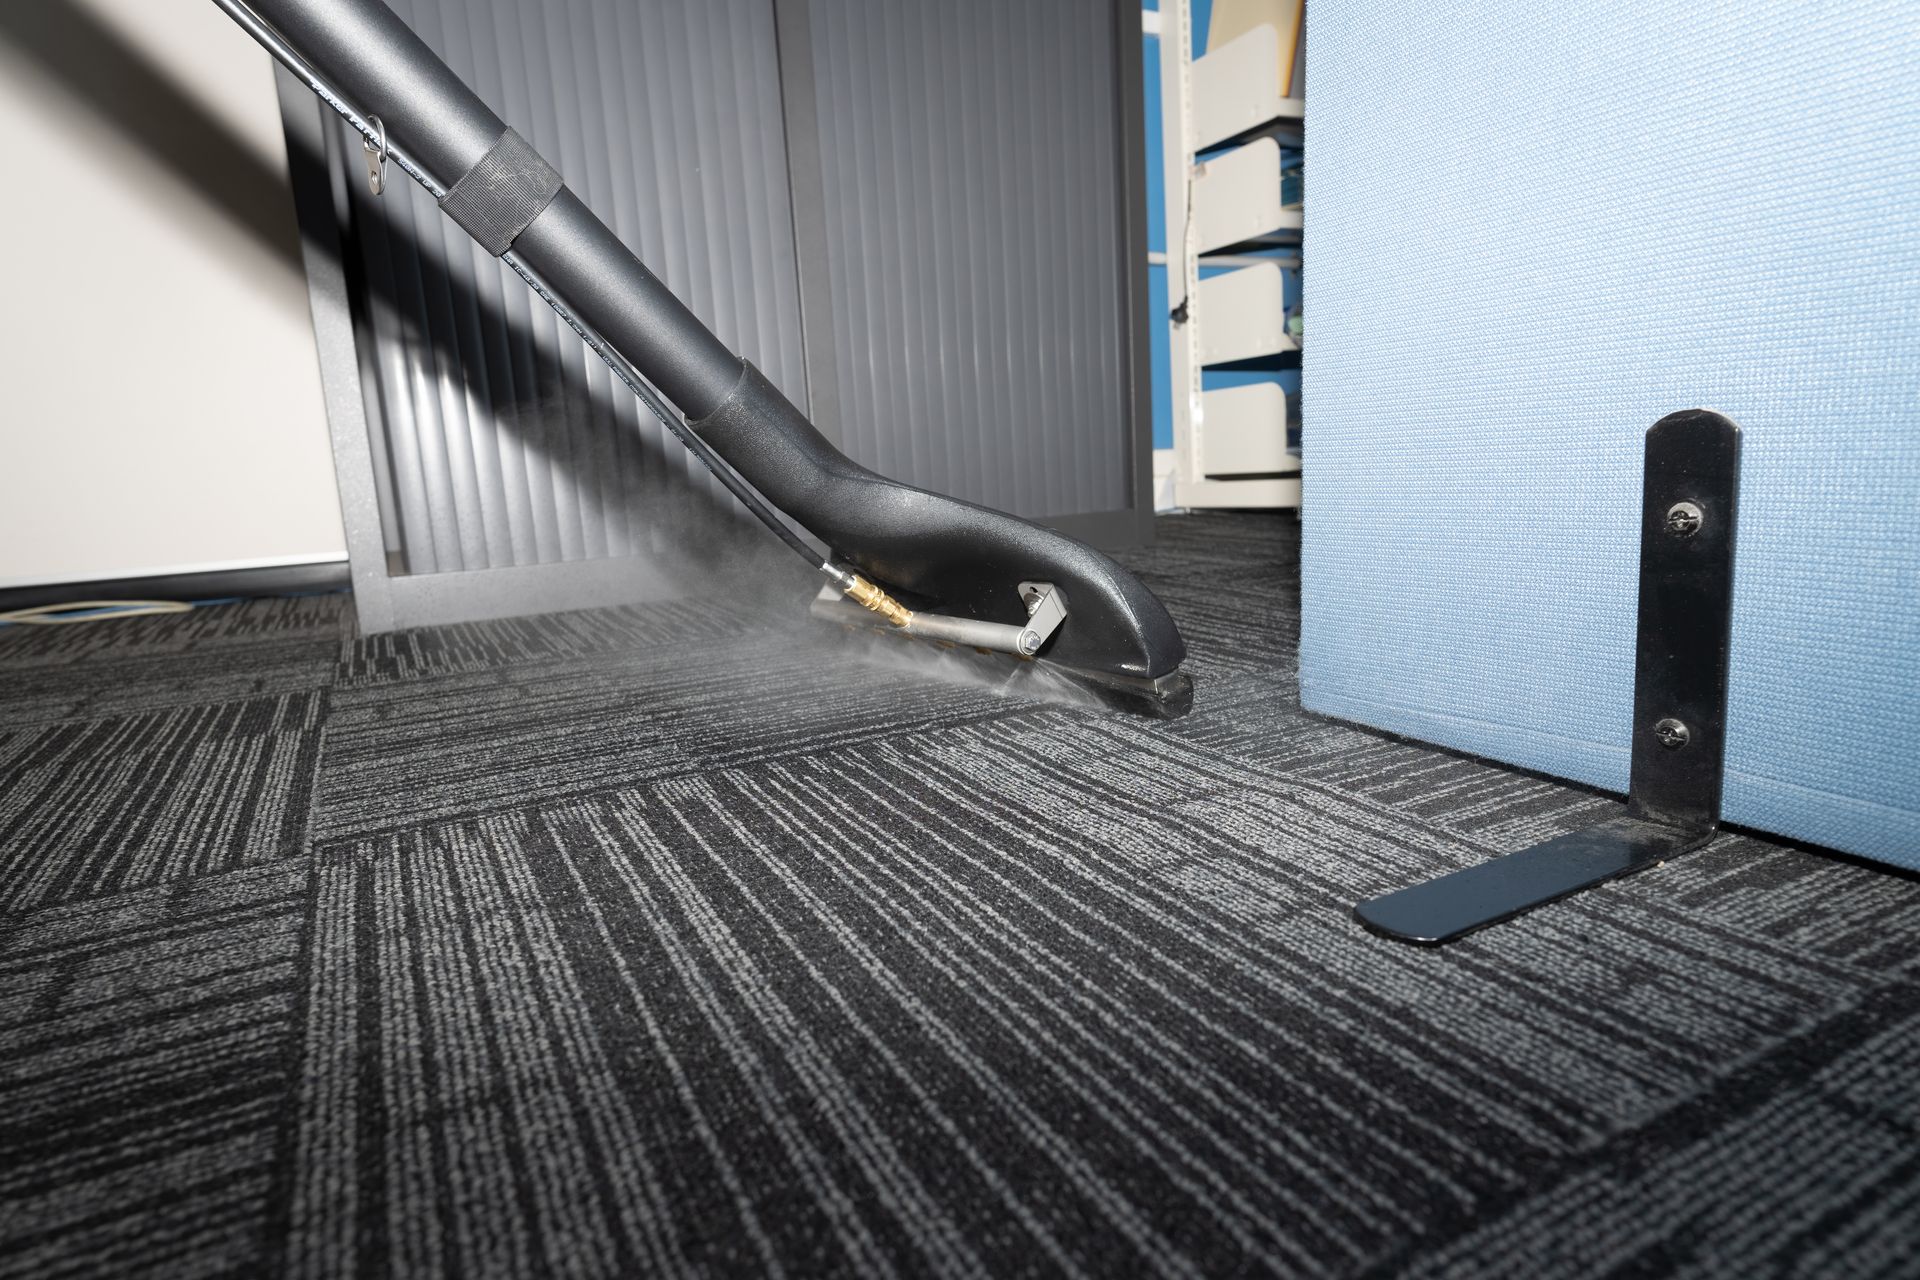 Professional steam carpet cleaning in action, using powerful equipment to effectively lift dirt and stains.